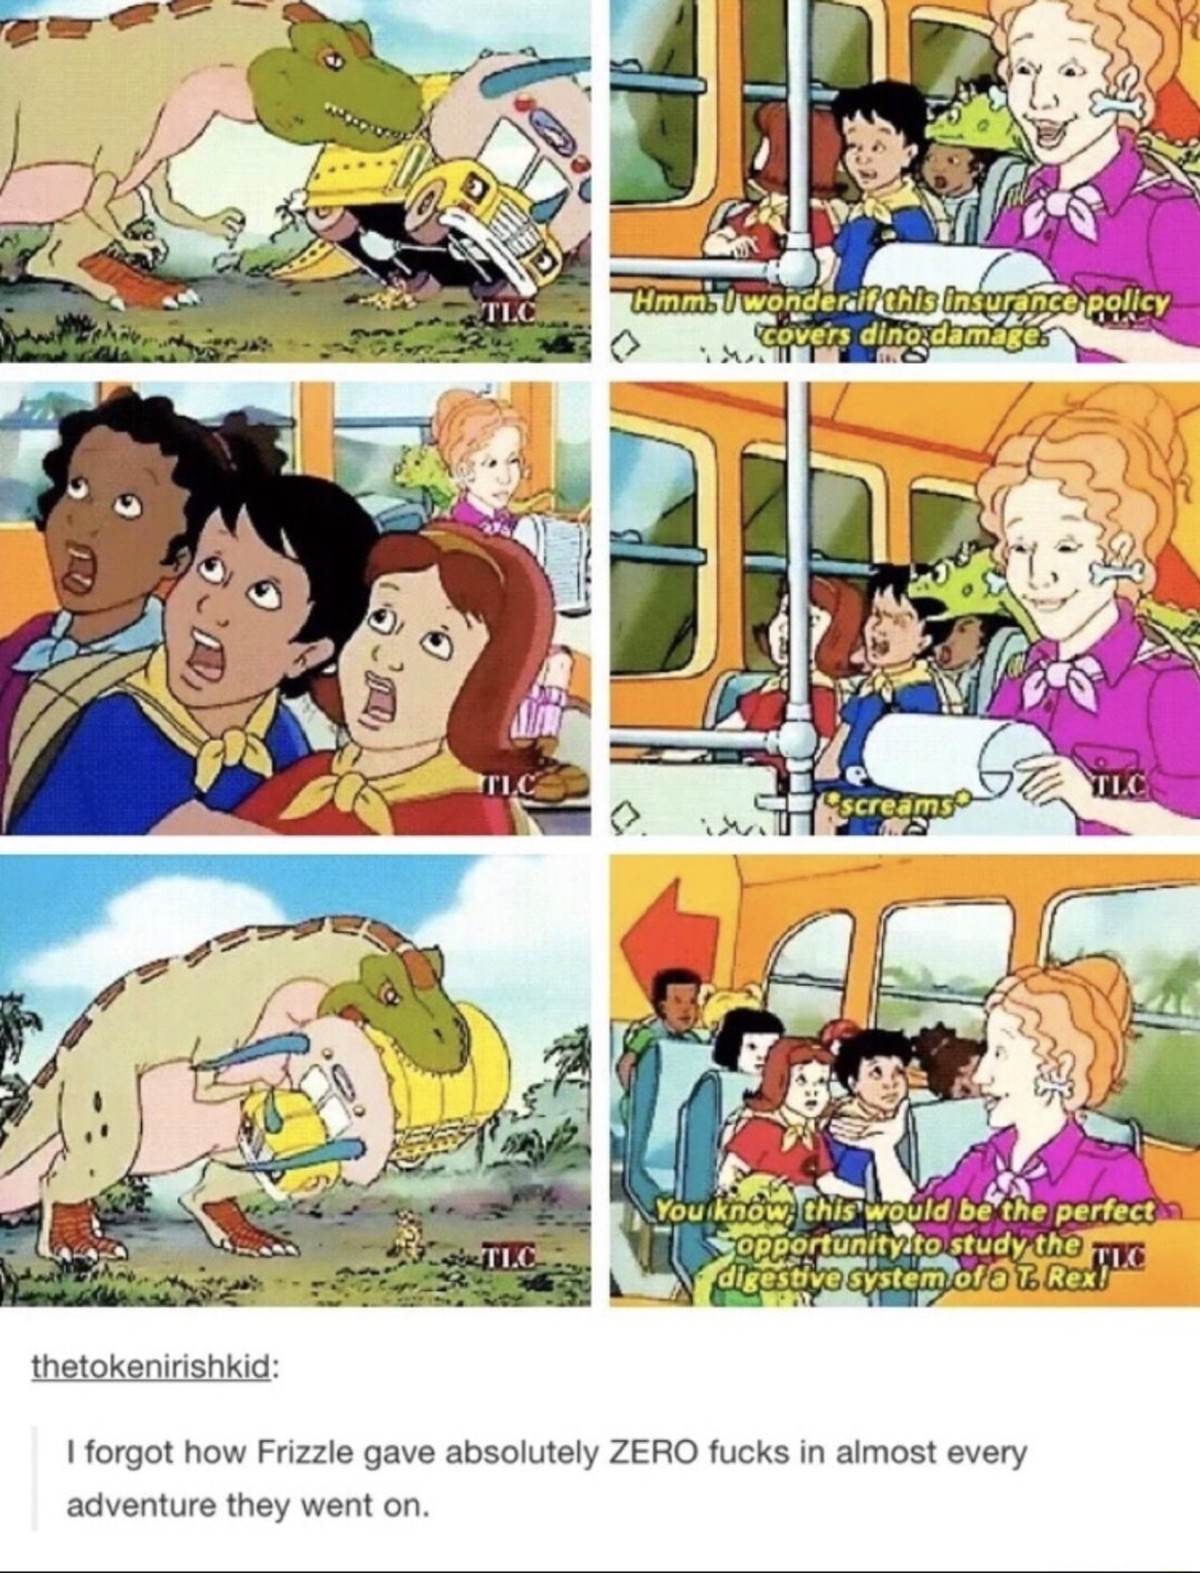 tyhe frizz. .. Ms Frizzle was secretly a wizard and you can't convince me otherwise